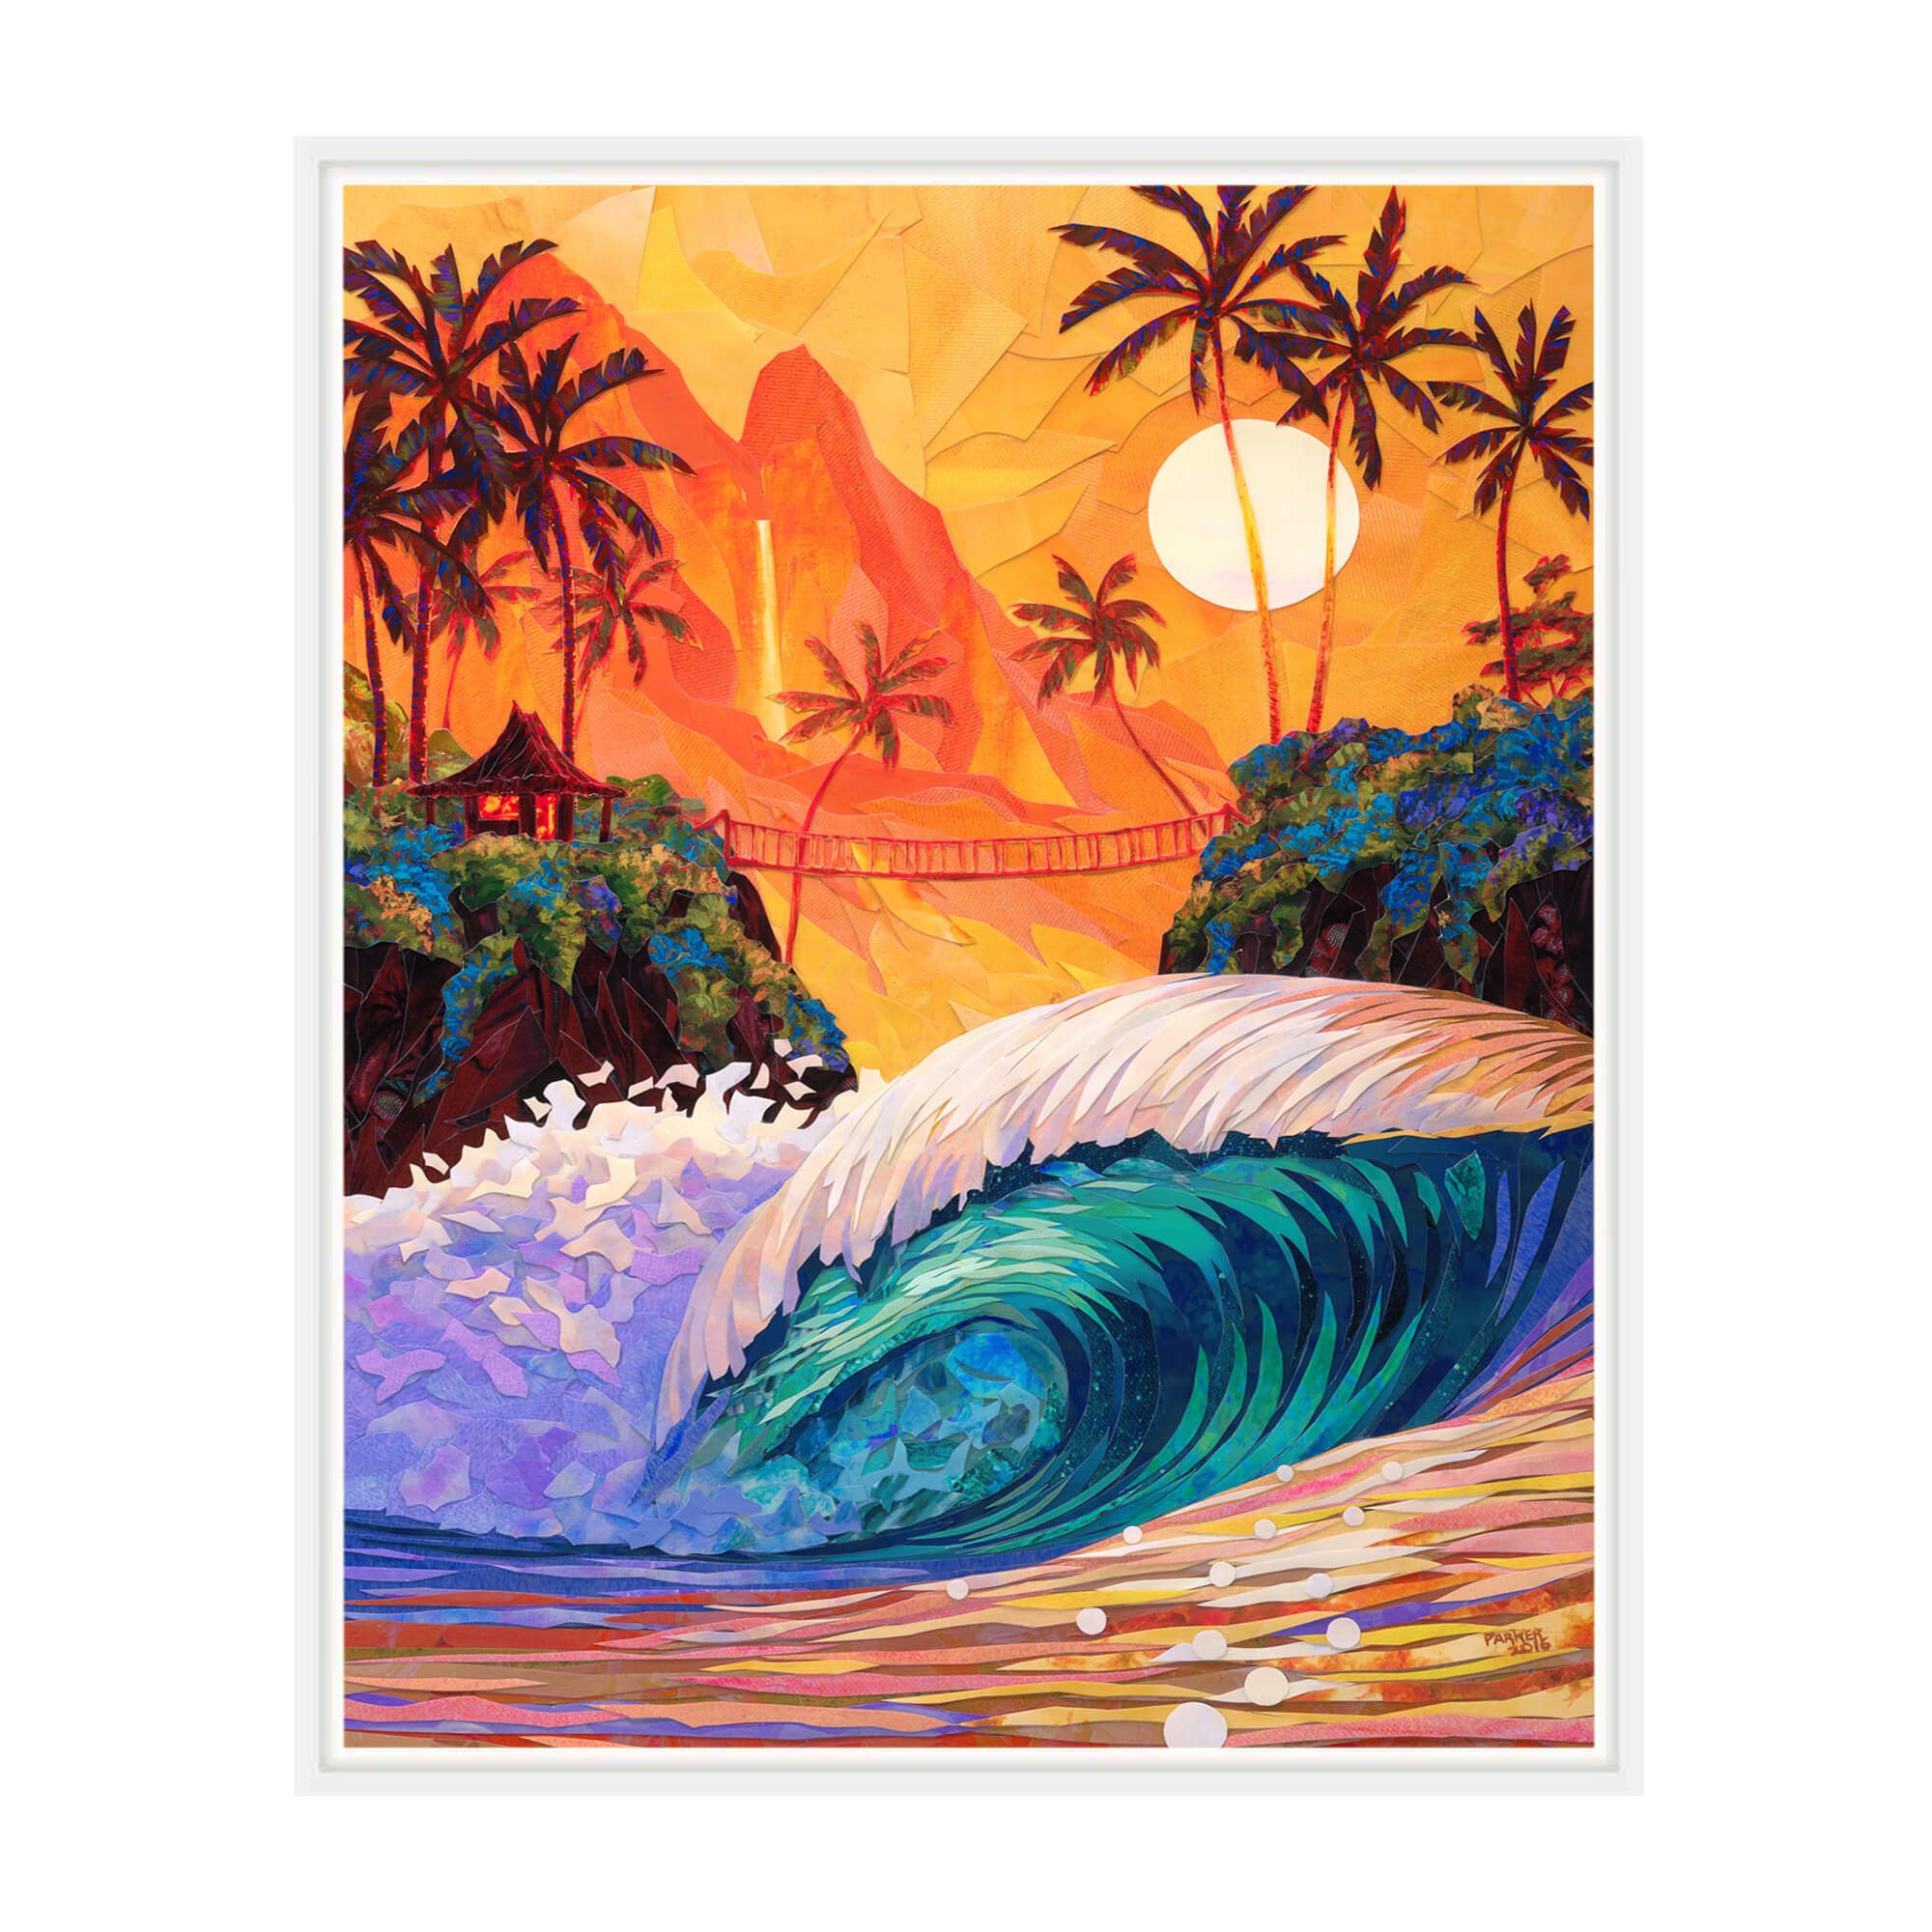 A framed canvas giclée art print featuring a collage of a vibrant sunset with teal-hued crashing waves, palm trees, and a mountain and waterfall background by Hawaii artist Patrick Parker